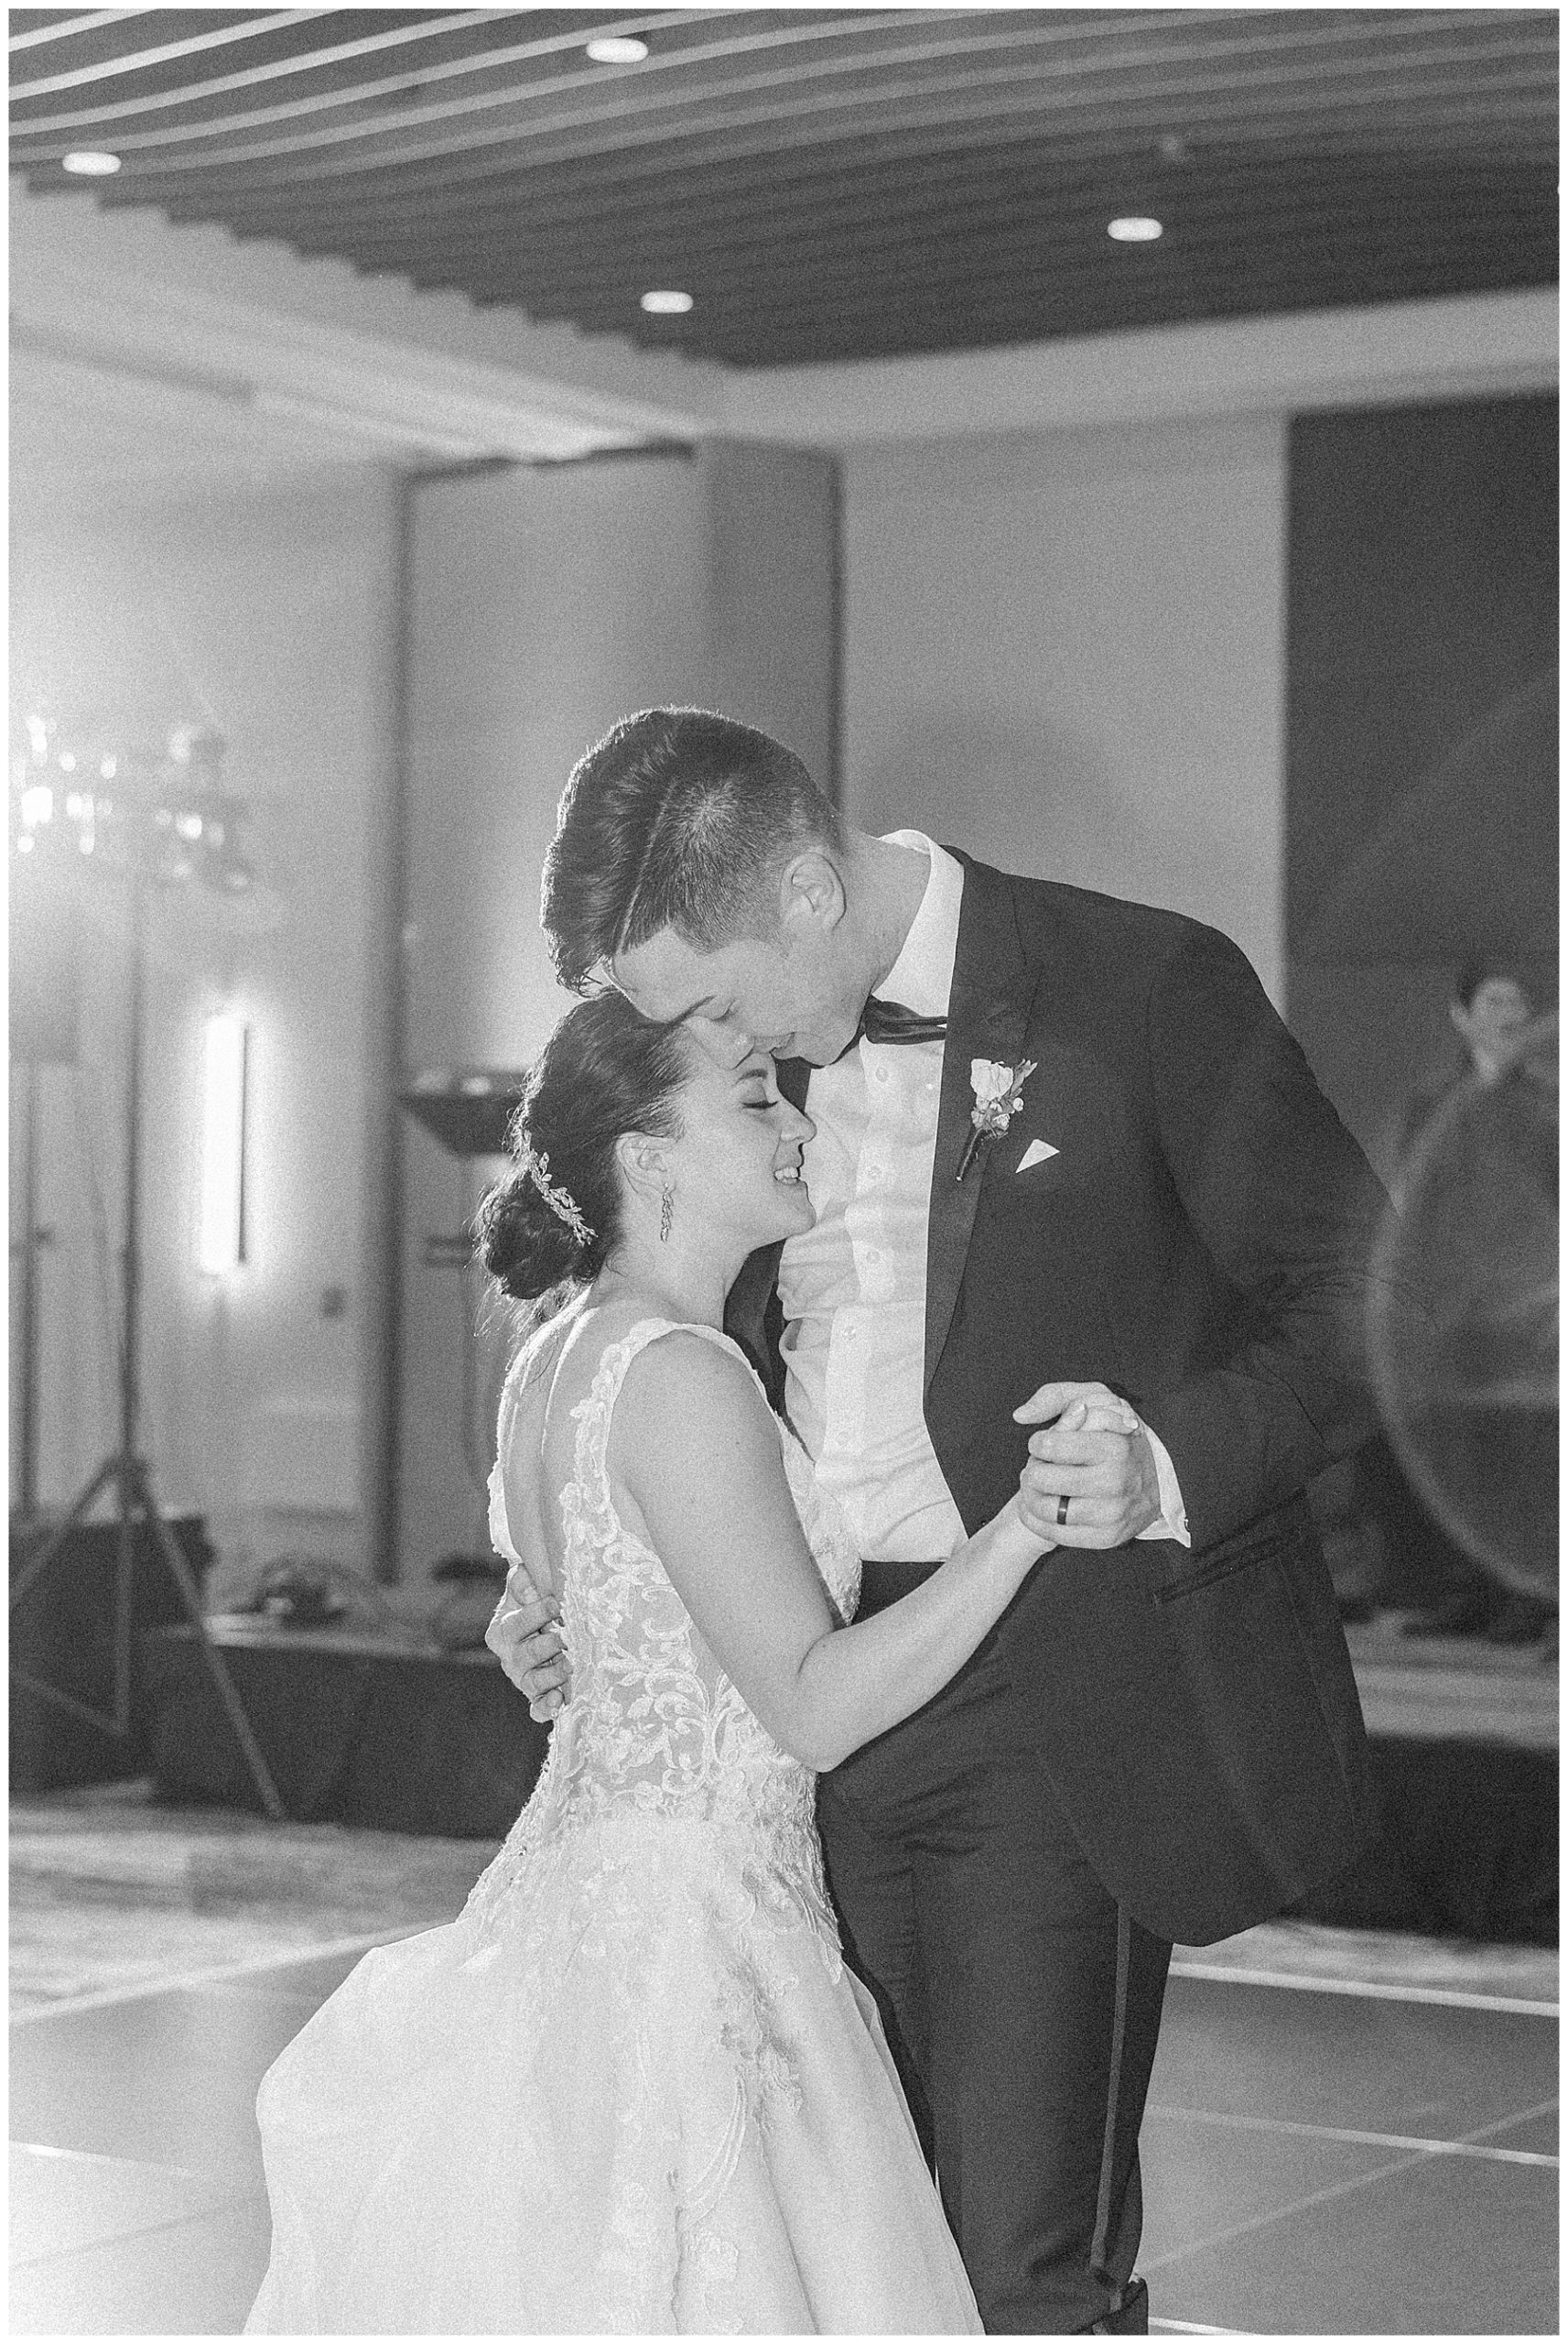 intimate moment of newlyweds dancing